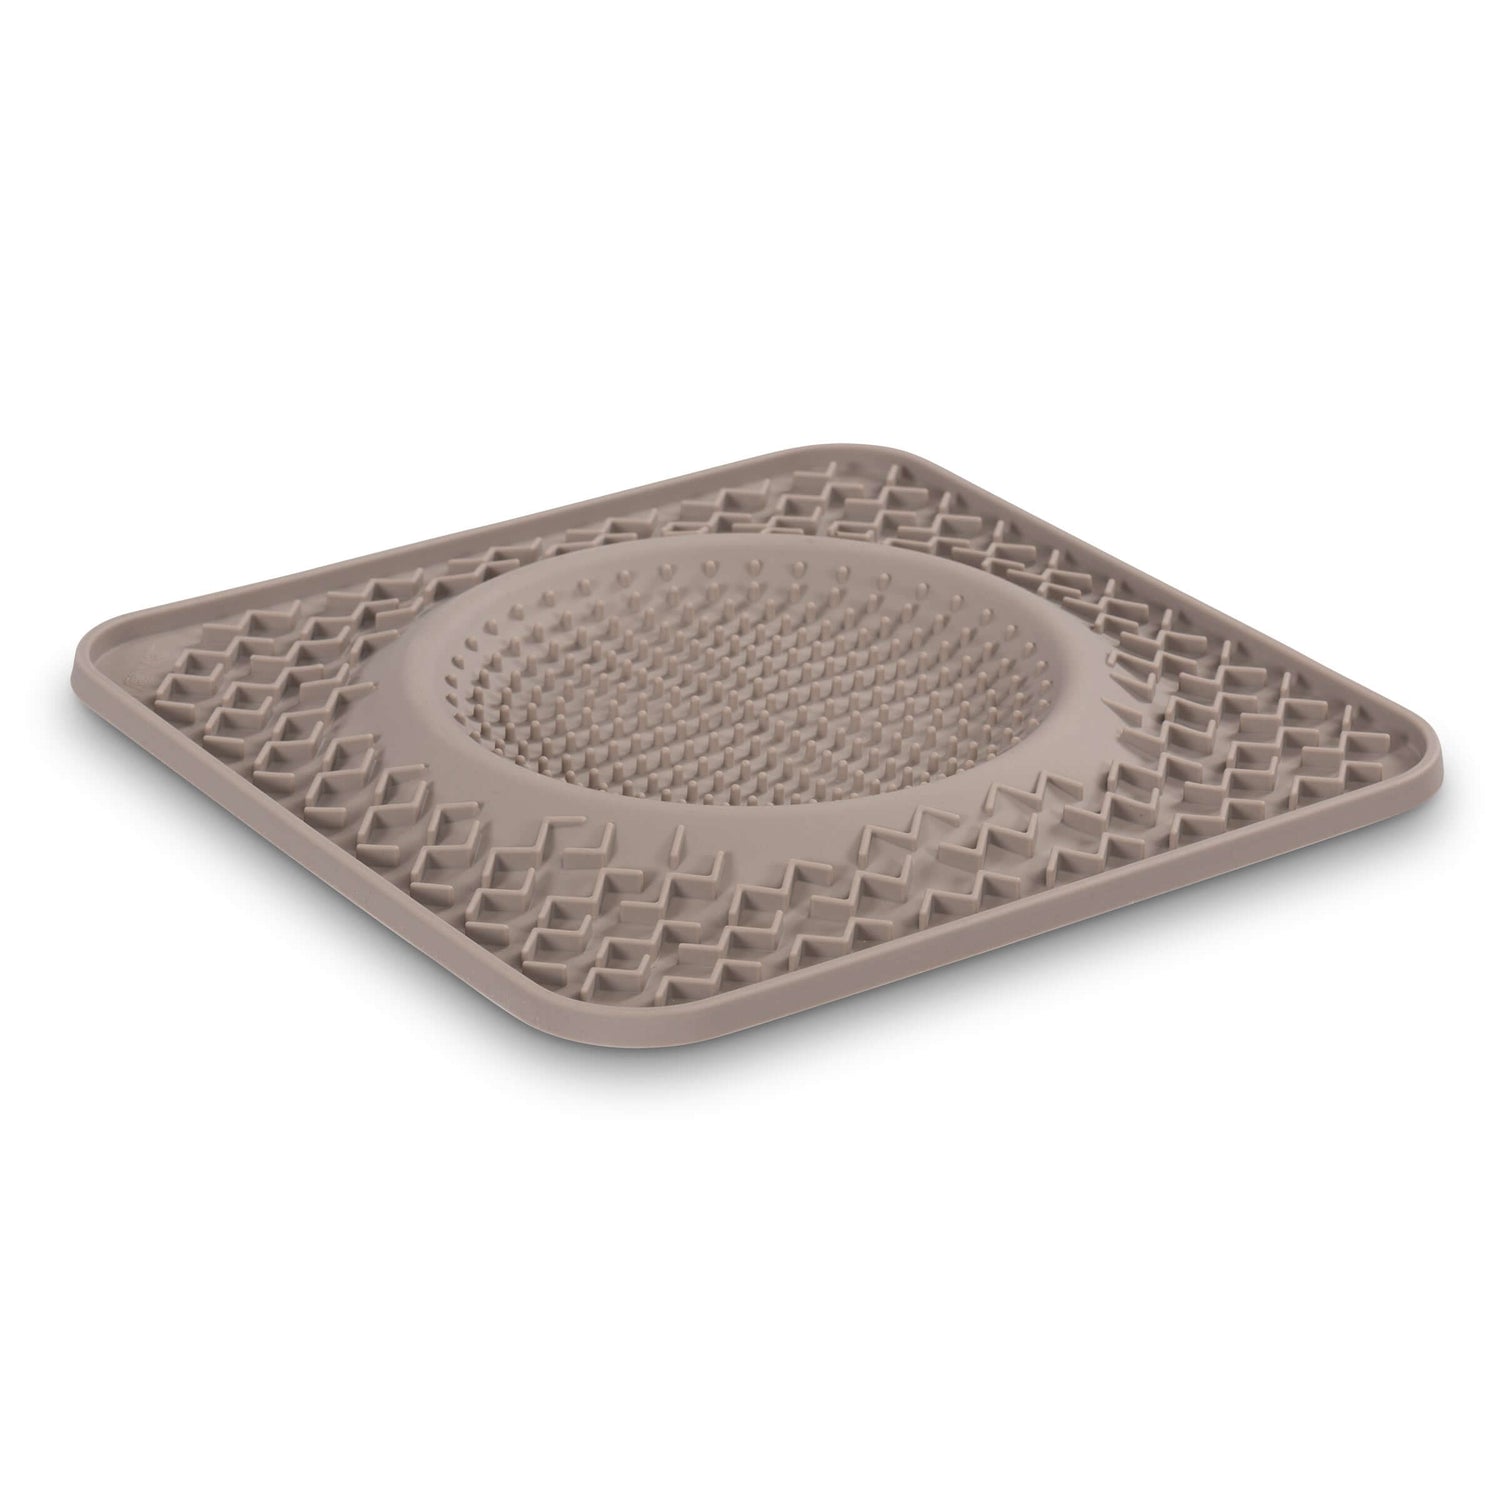 Silicone dog  lick bowl mats are designed to be non slip to give your pup a chance! Hols up to 1 cup in the bowl portion.